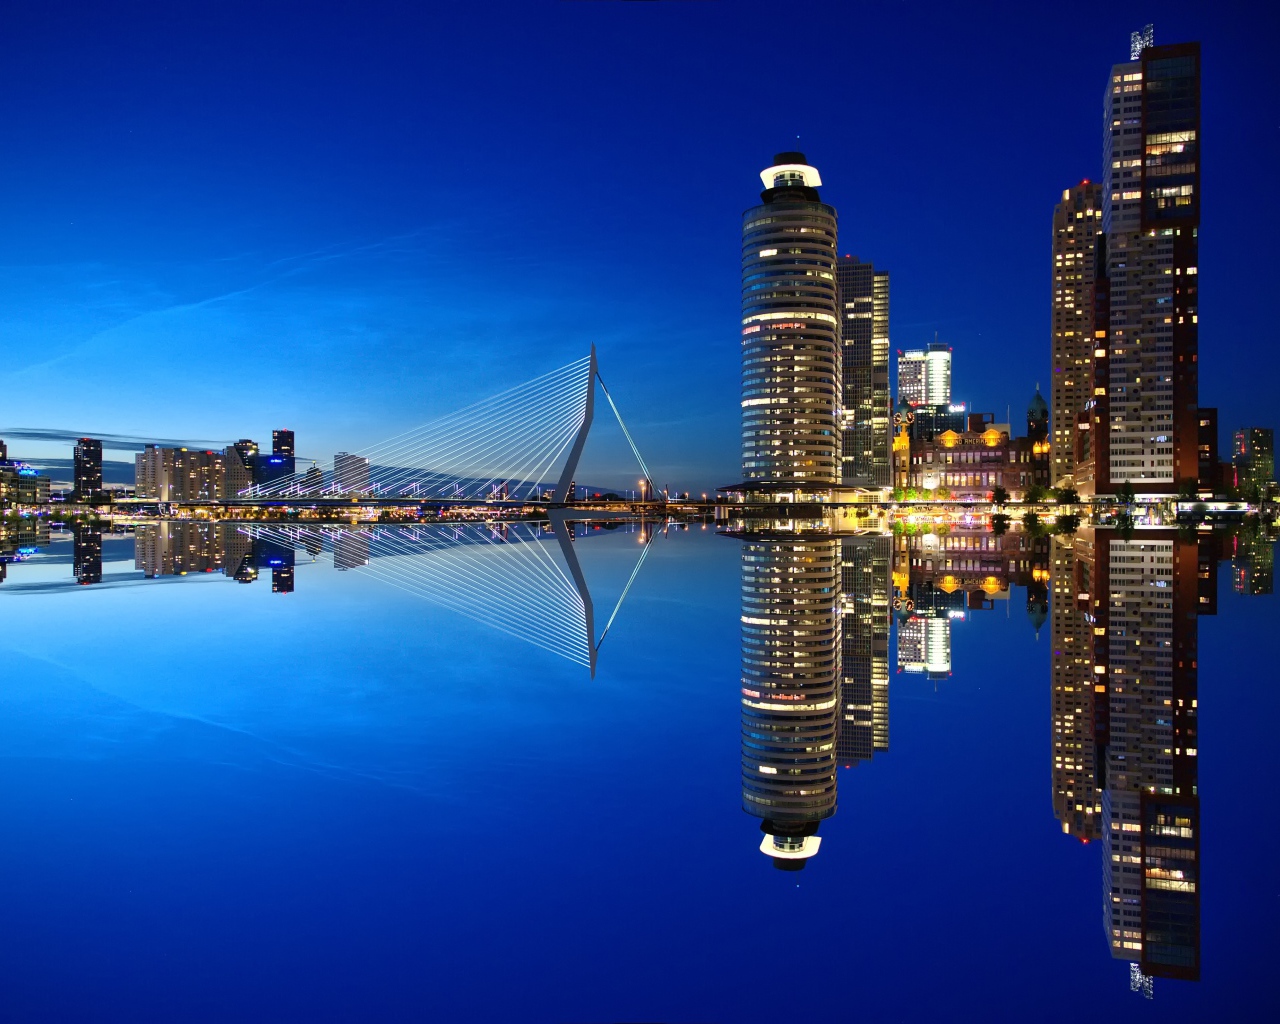 Skyscrapers and bridge are reflected in calm water